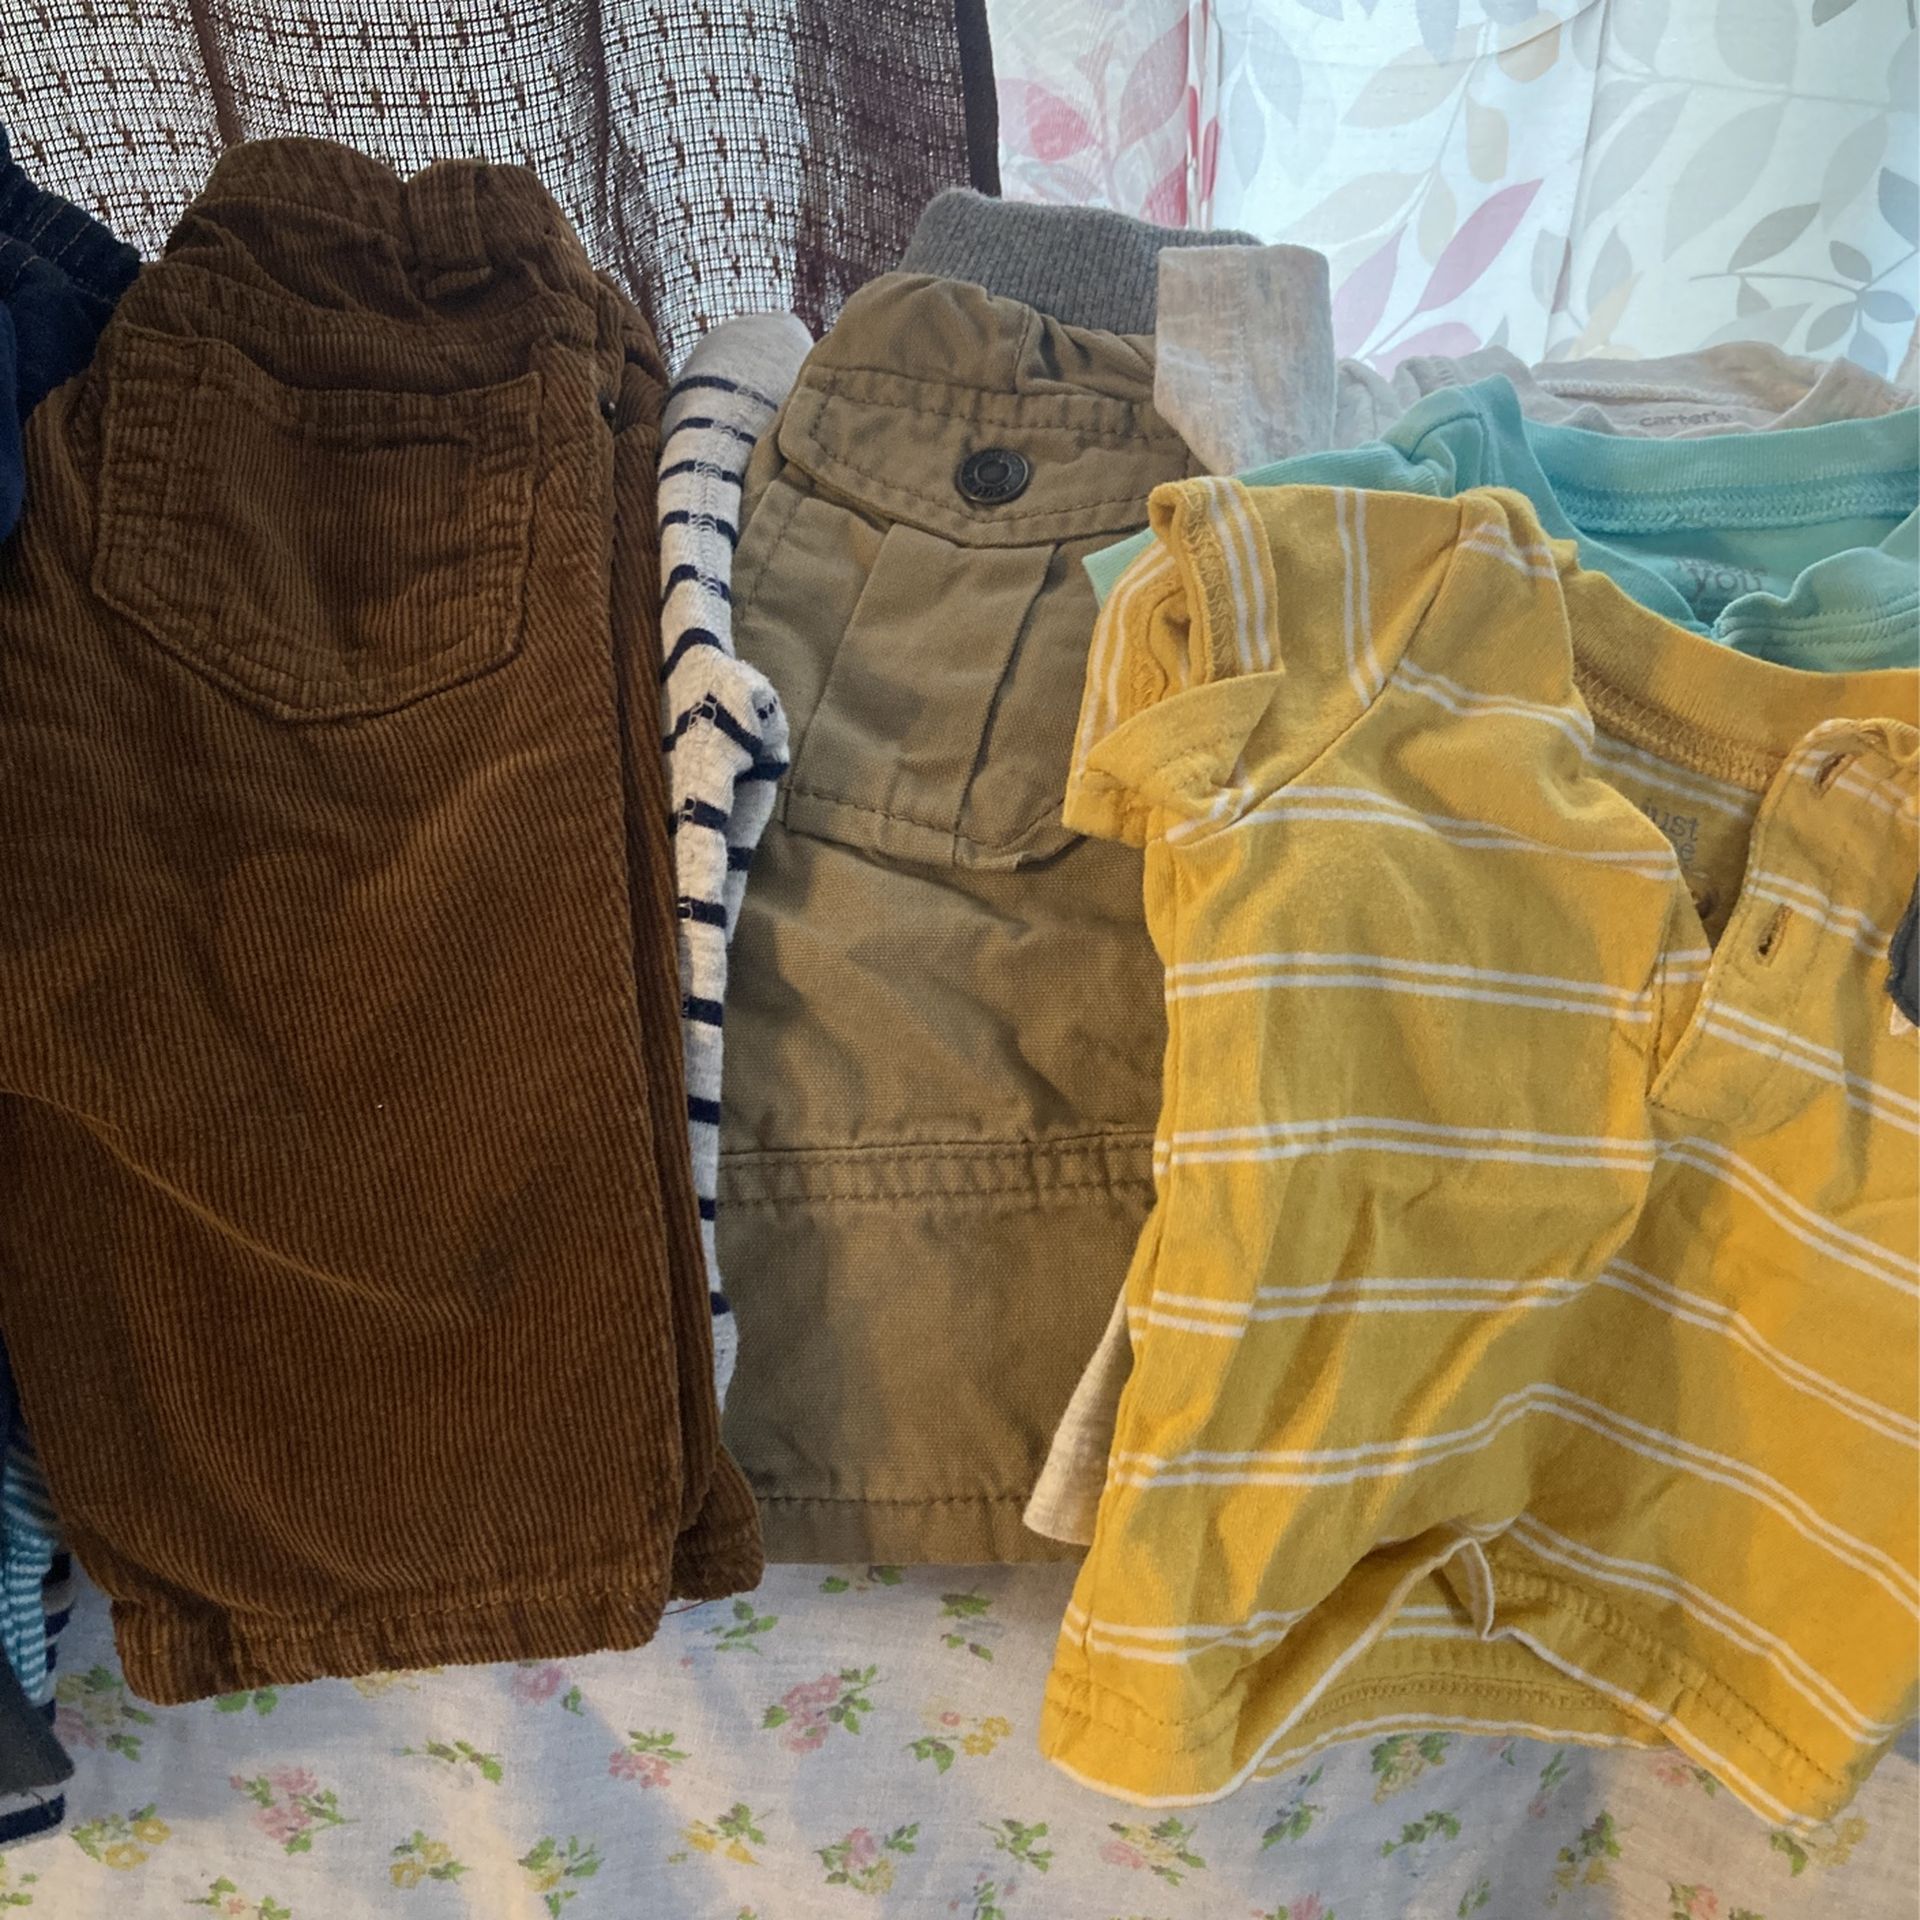 Baby Boy Clothes Shoes,blankets & Swaddles 